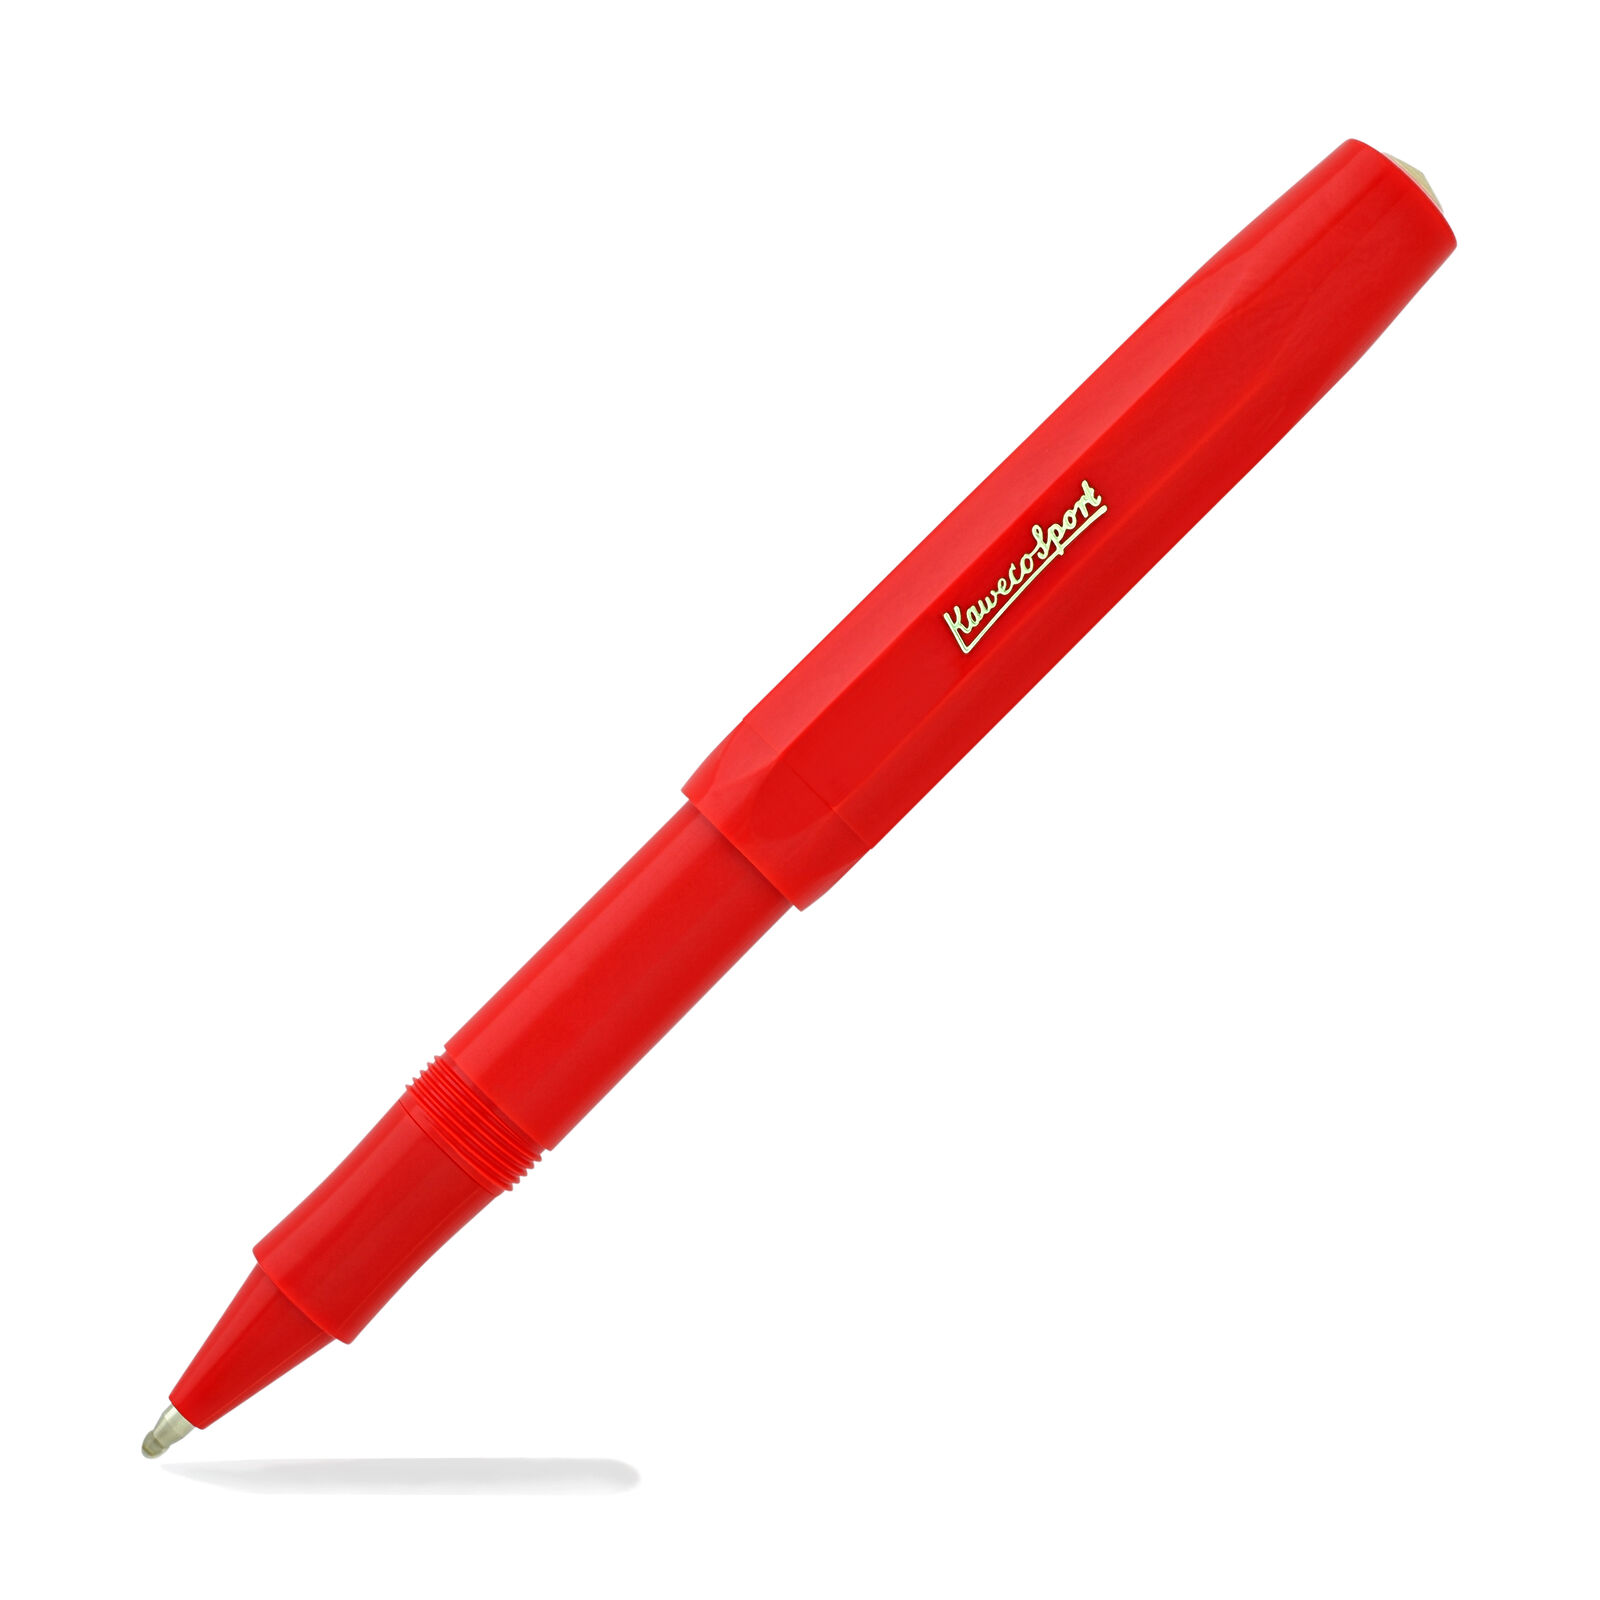 Kaweco Classic Sport Rollerball Pen - Red - 1001150 - New In Box